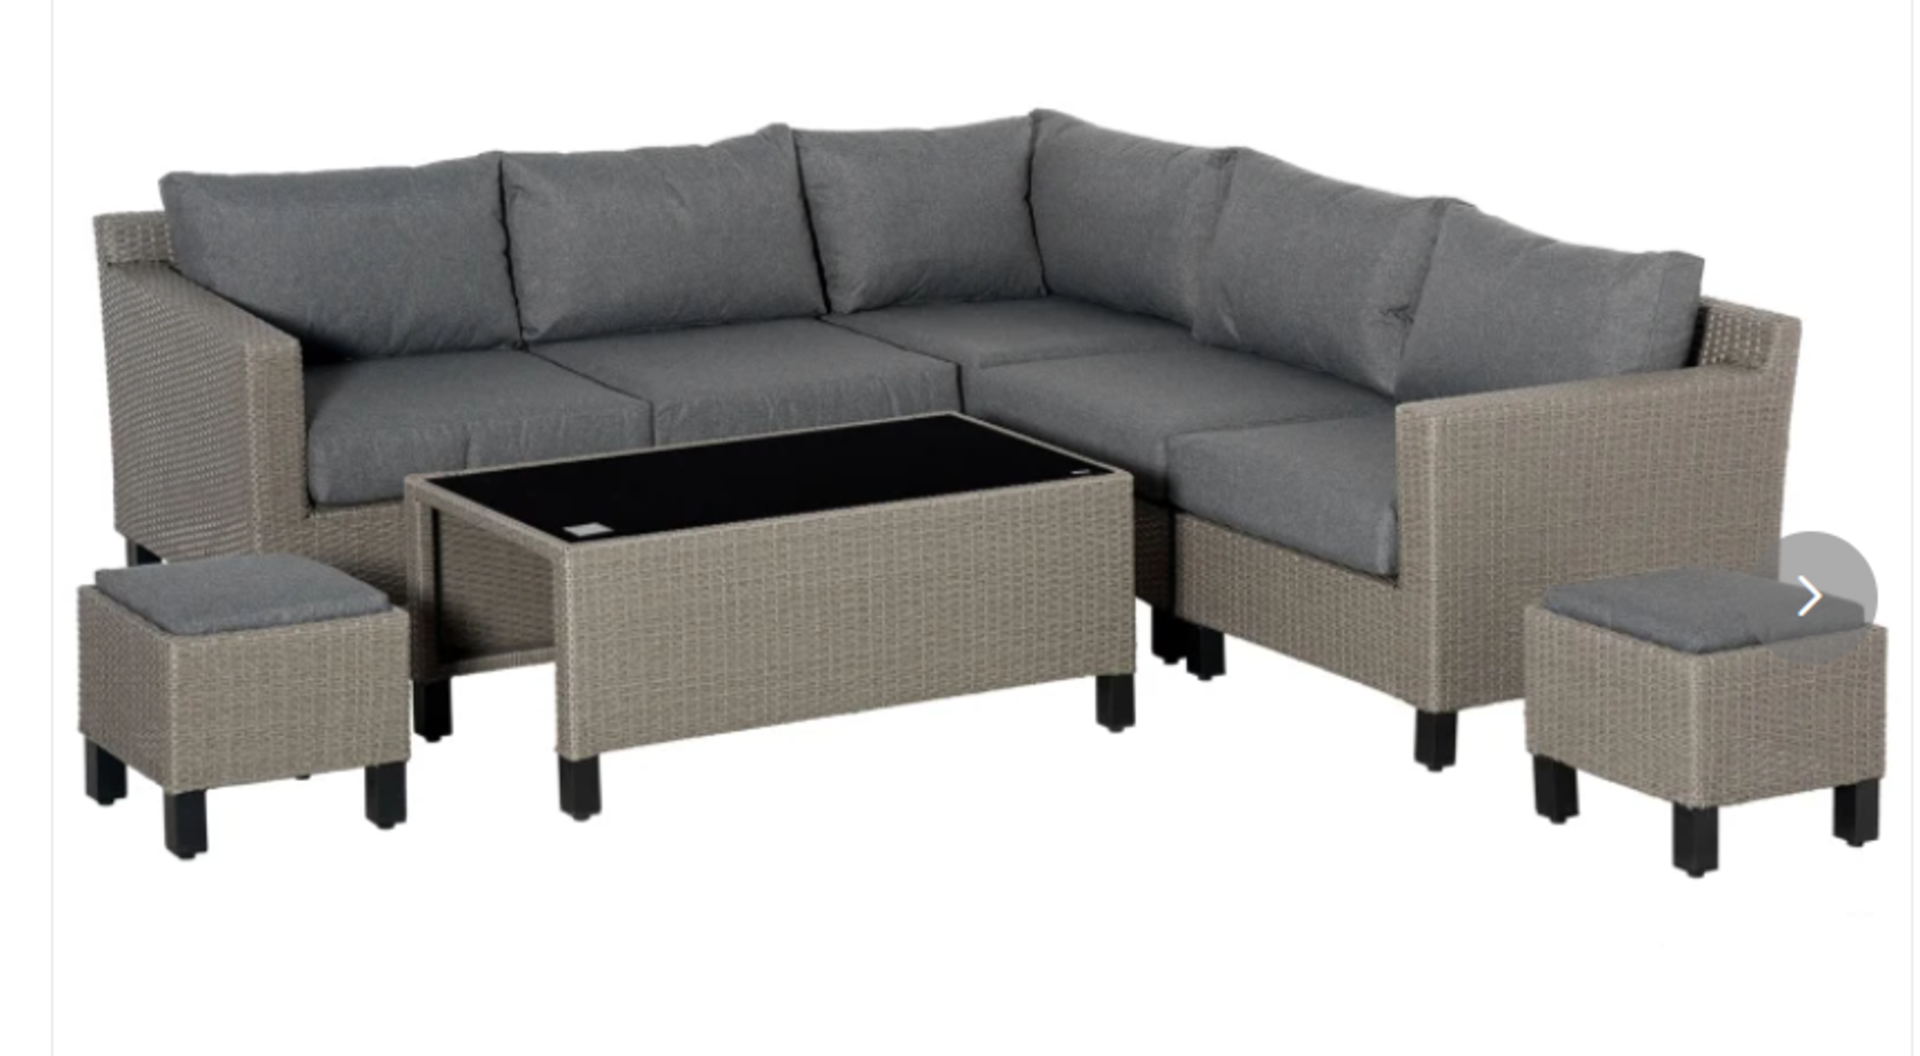 Outsunny Outdoor PE Rattan Sofa Set - ER37., Patio All Weather Twin Wicker Conservatory Corner